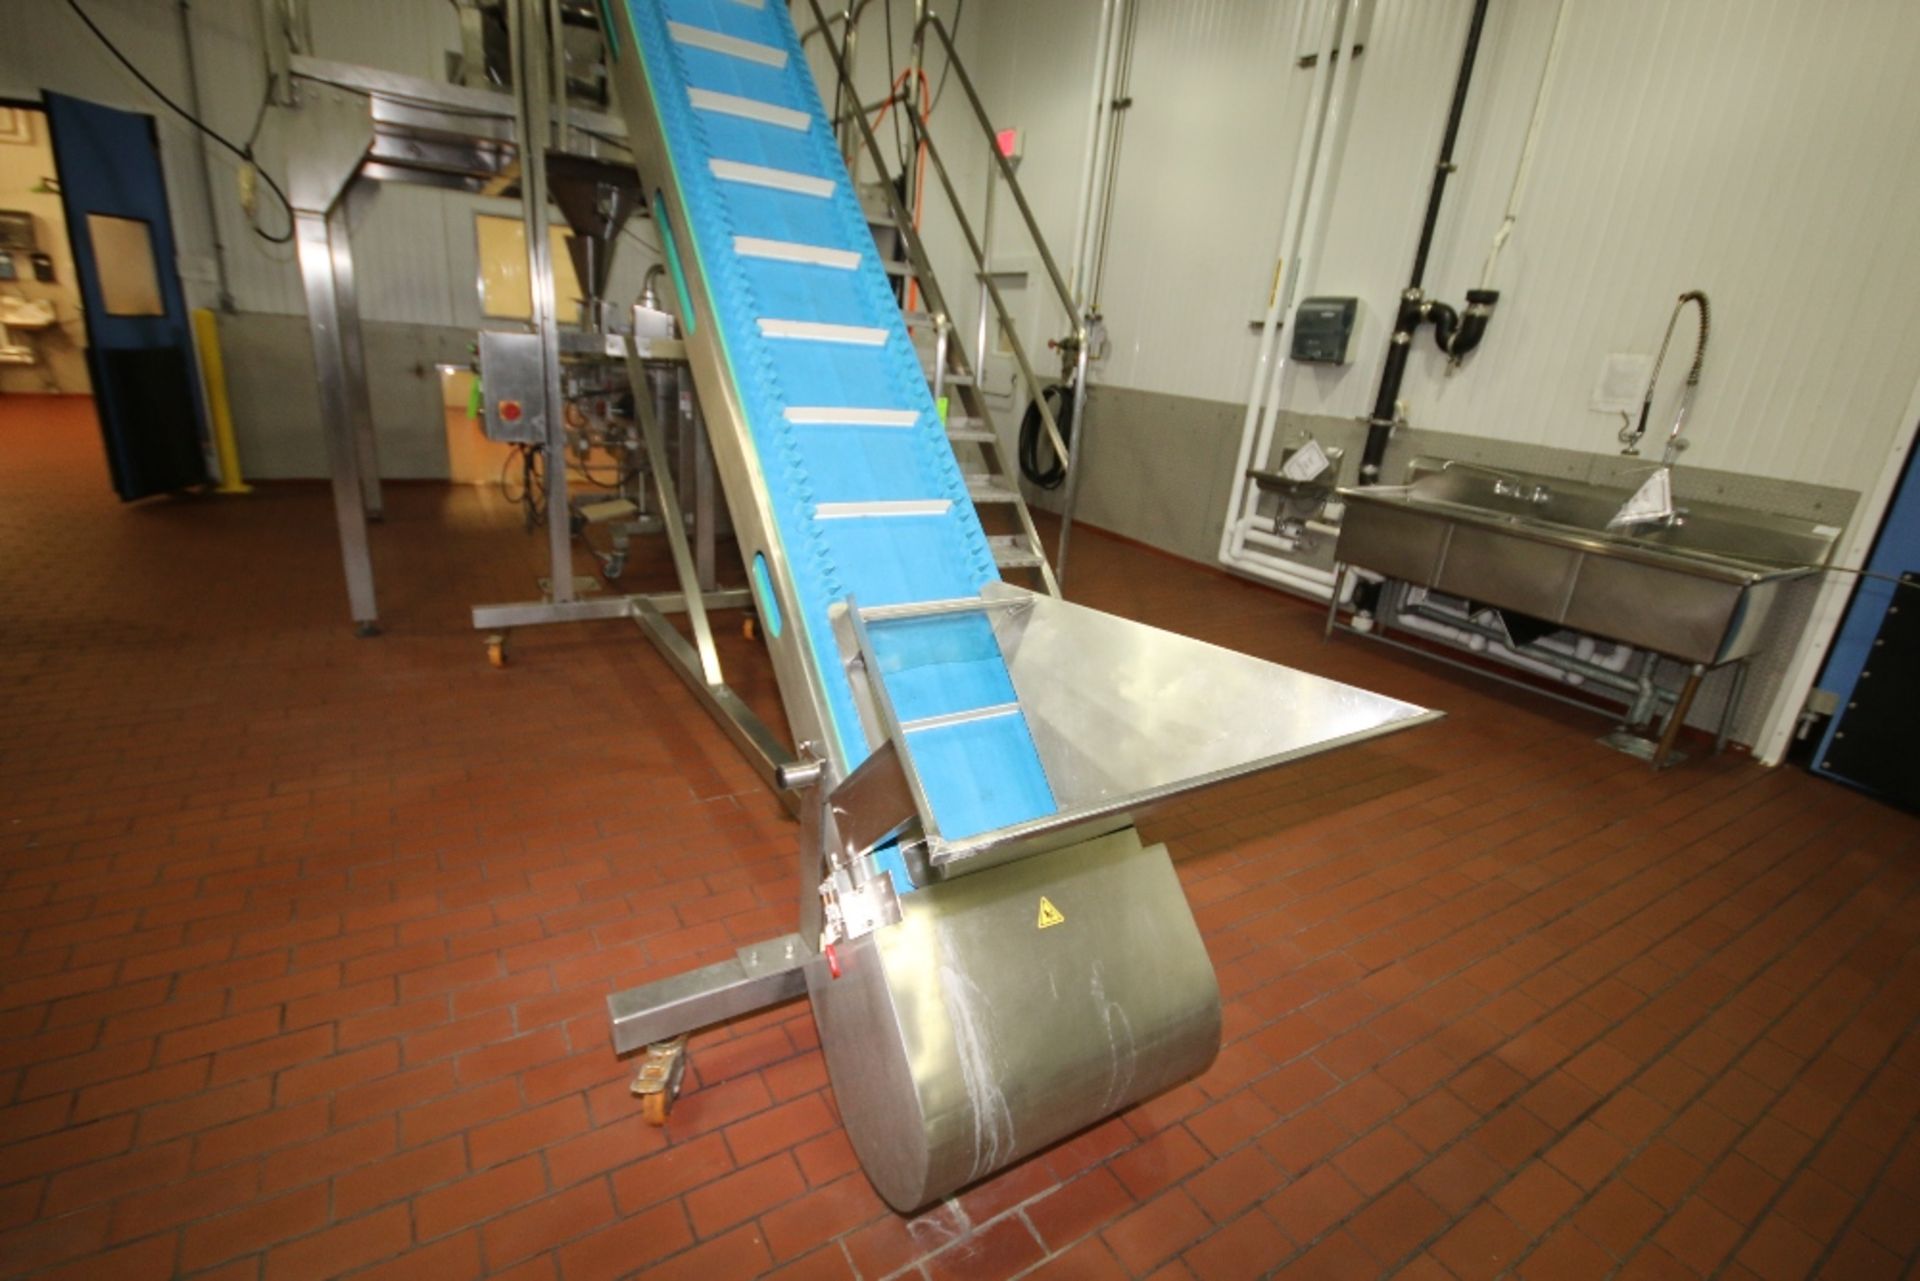 2010 Weighpack 168" H S/S Inclined Conveyor with 16" W Belt with Flights, Arpin Feed and IG5 VFD - Image 2 of 4